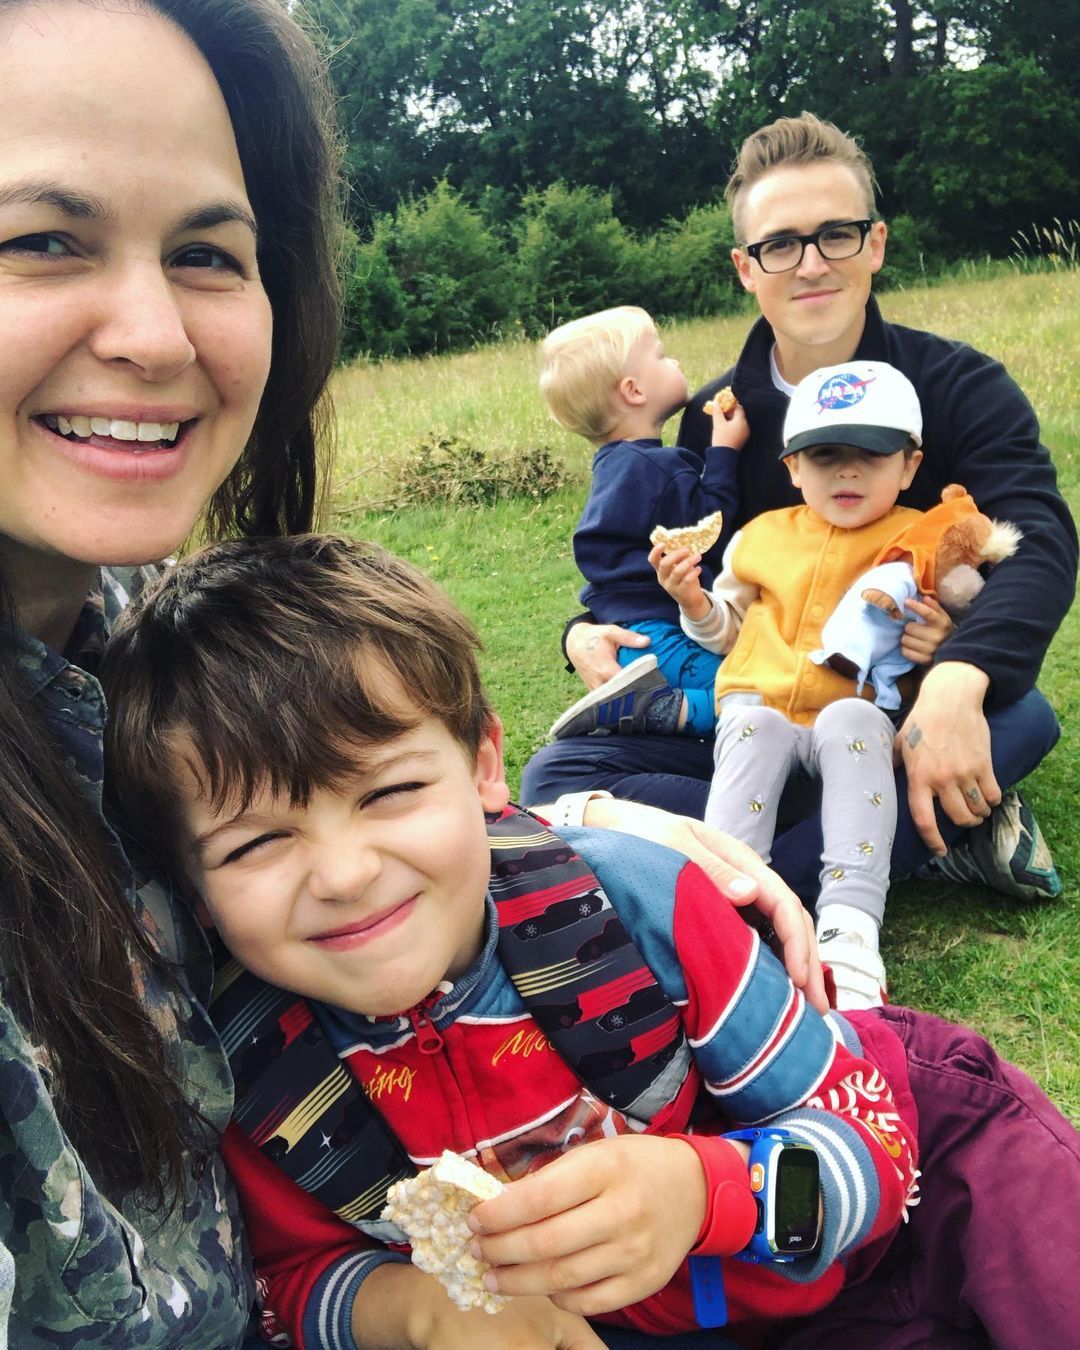 I’m A Celebrity’s Giovanna Fletcher in tears as the mum-of-three reveals she misses her kids